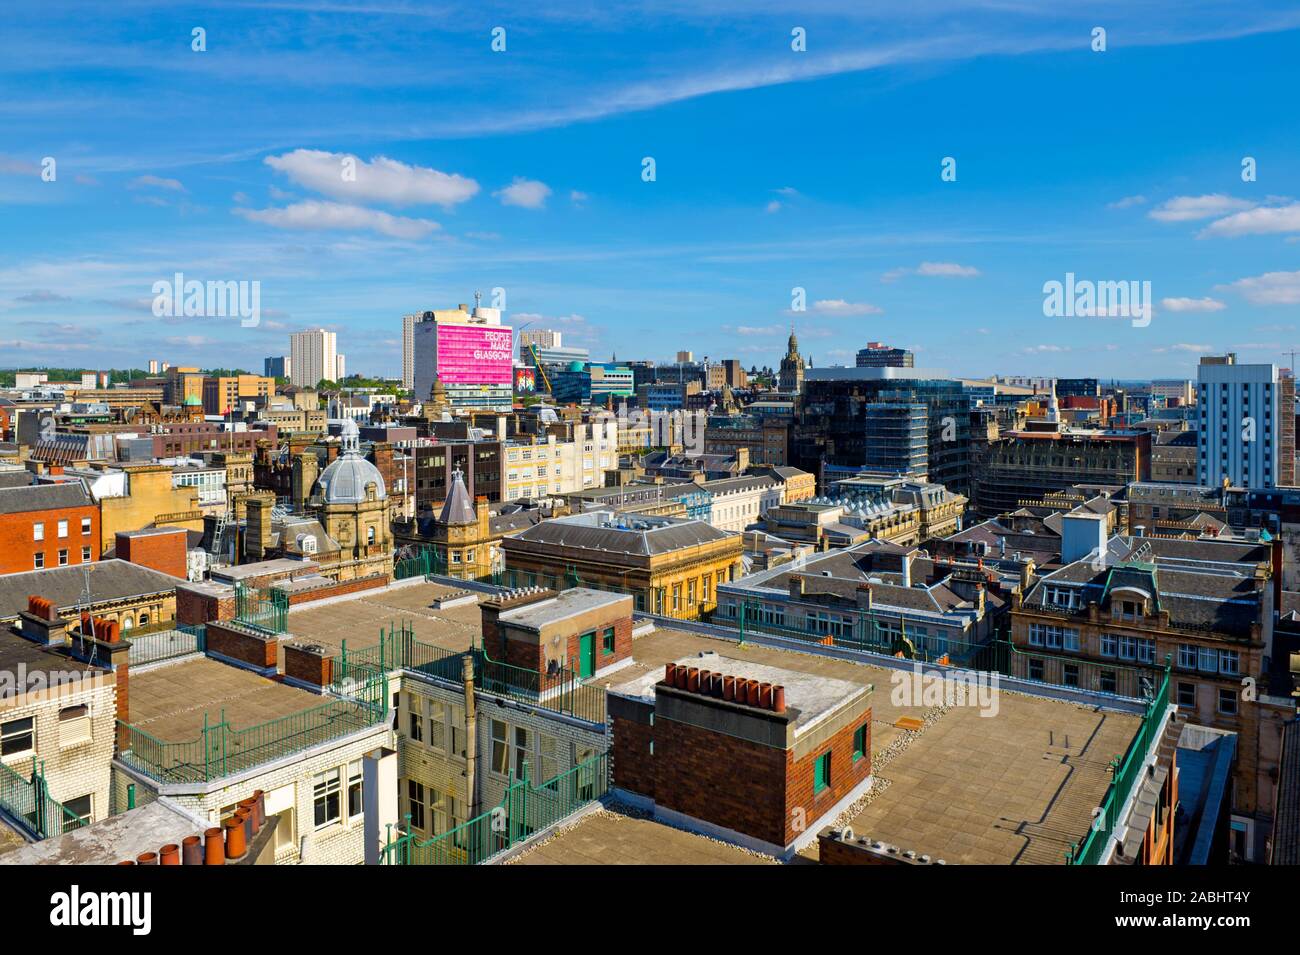 Glasgow - the most industrial of the two southern Scottish cities. Stock Photo